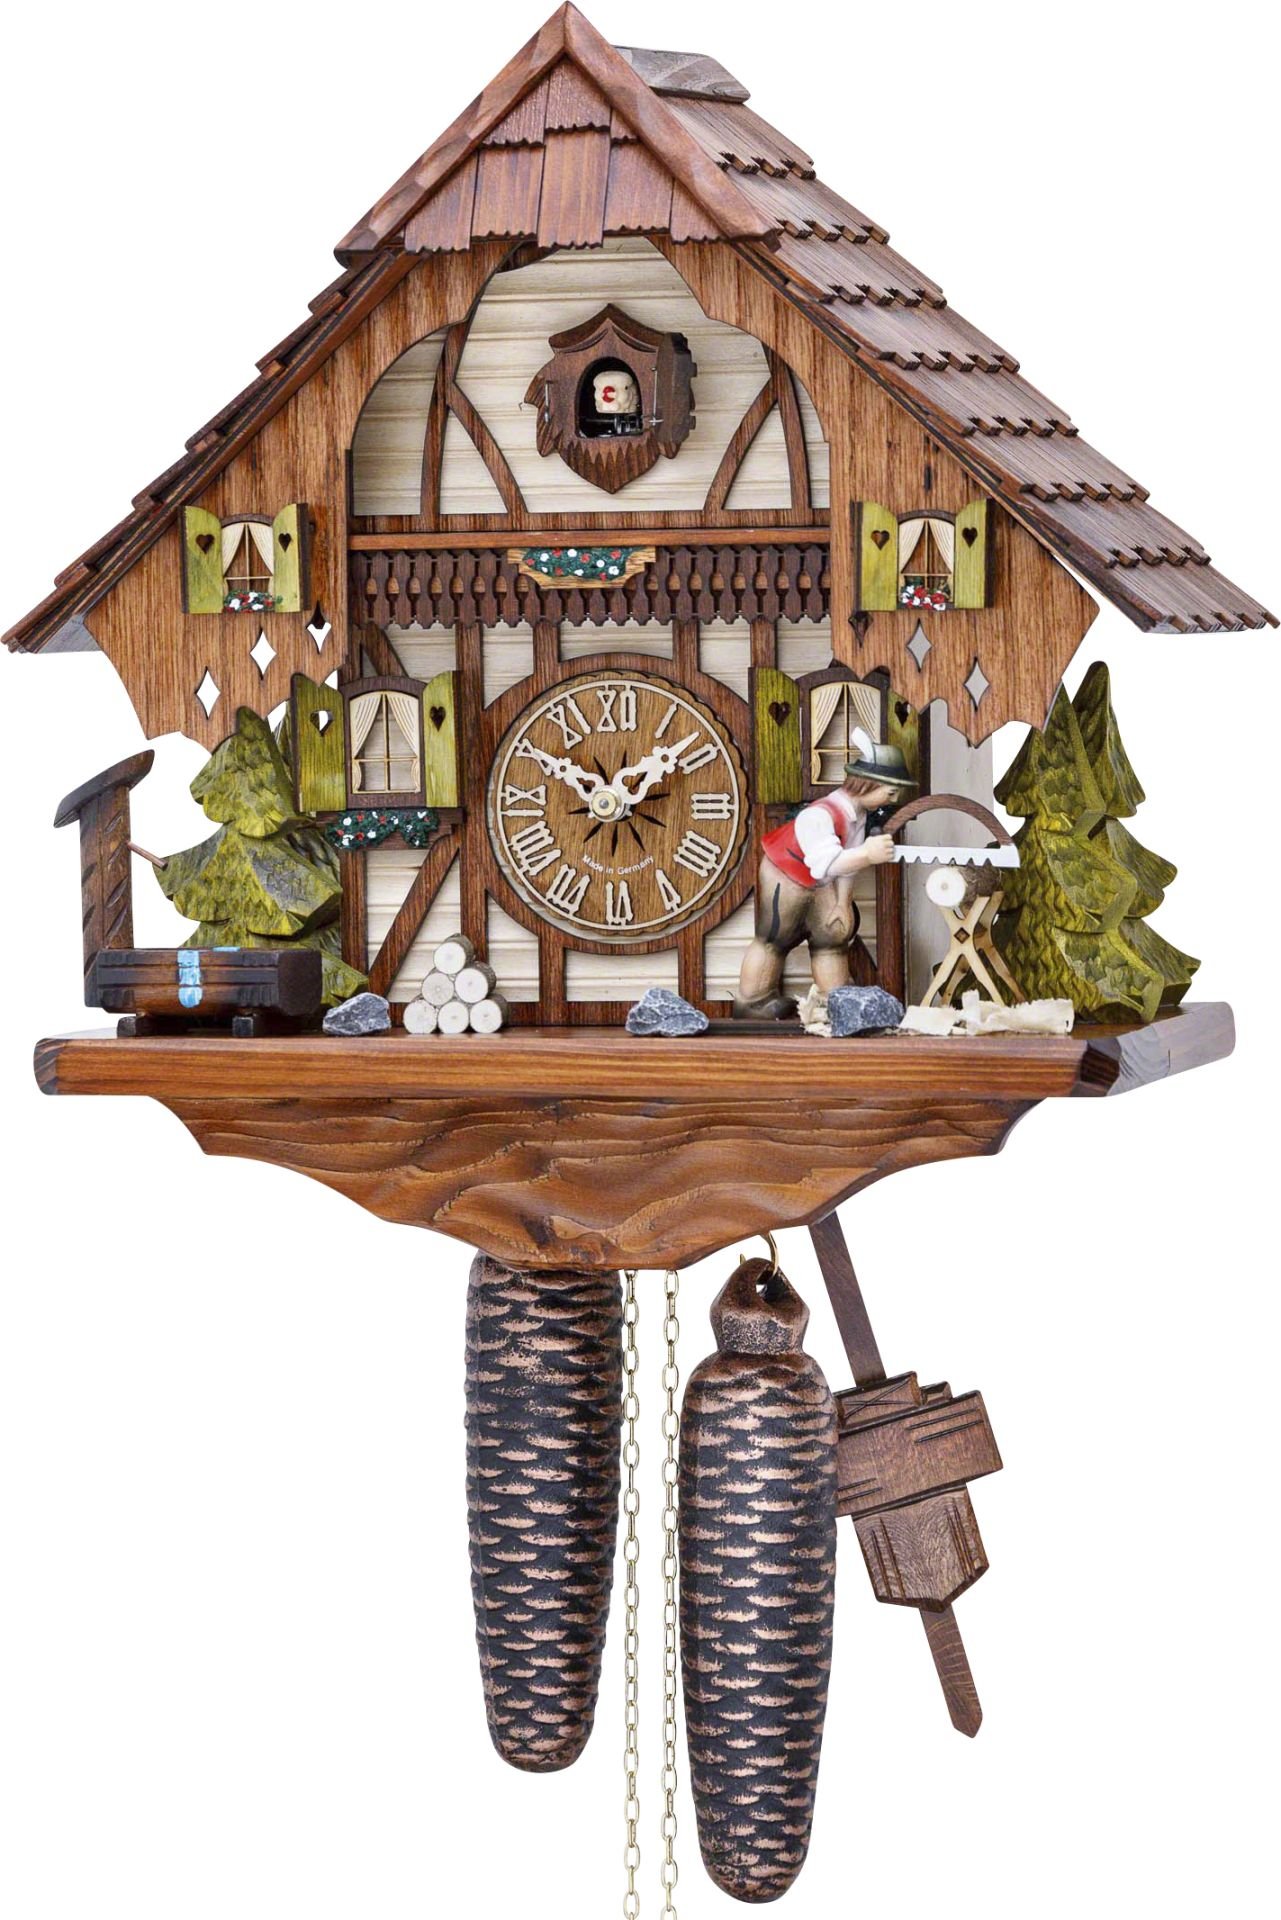 Cuckoo Clock Chalet Style 8 Day Movement 32cm by Hekas